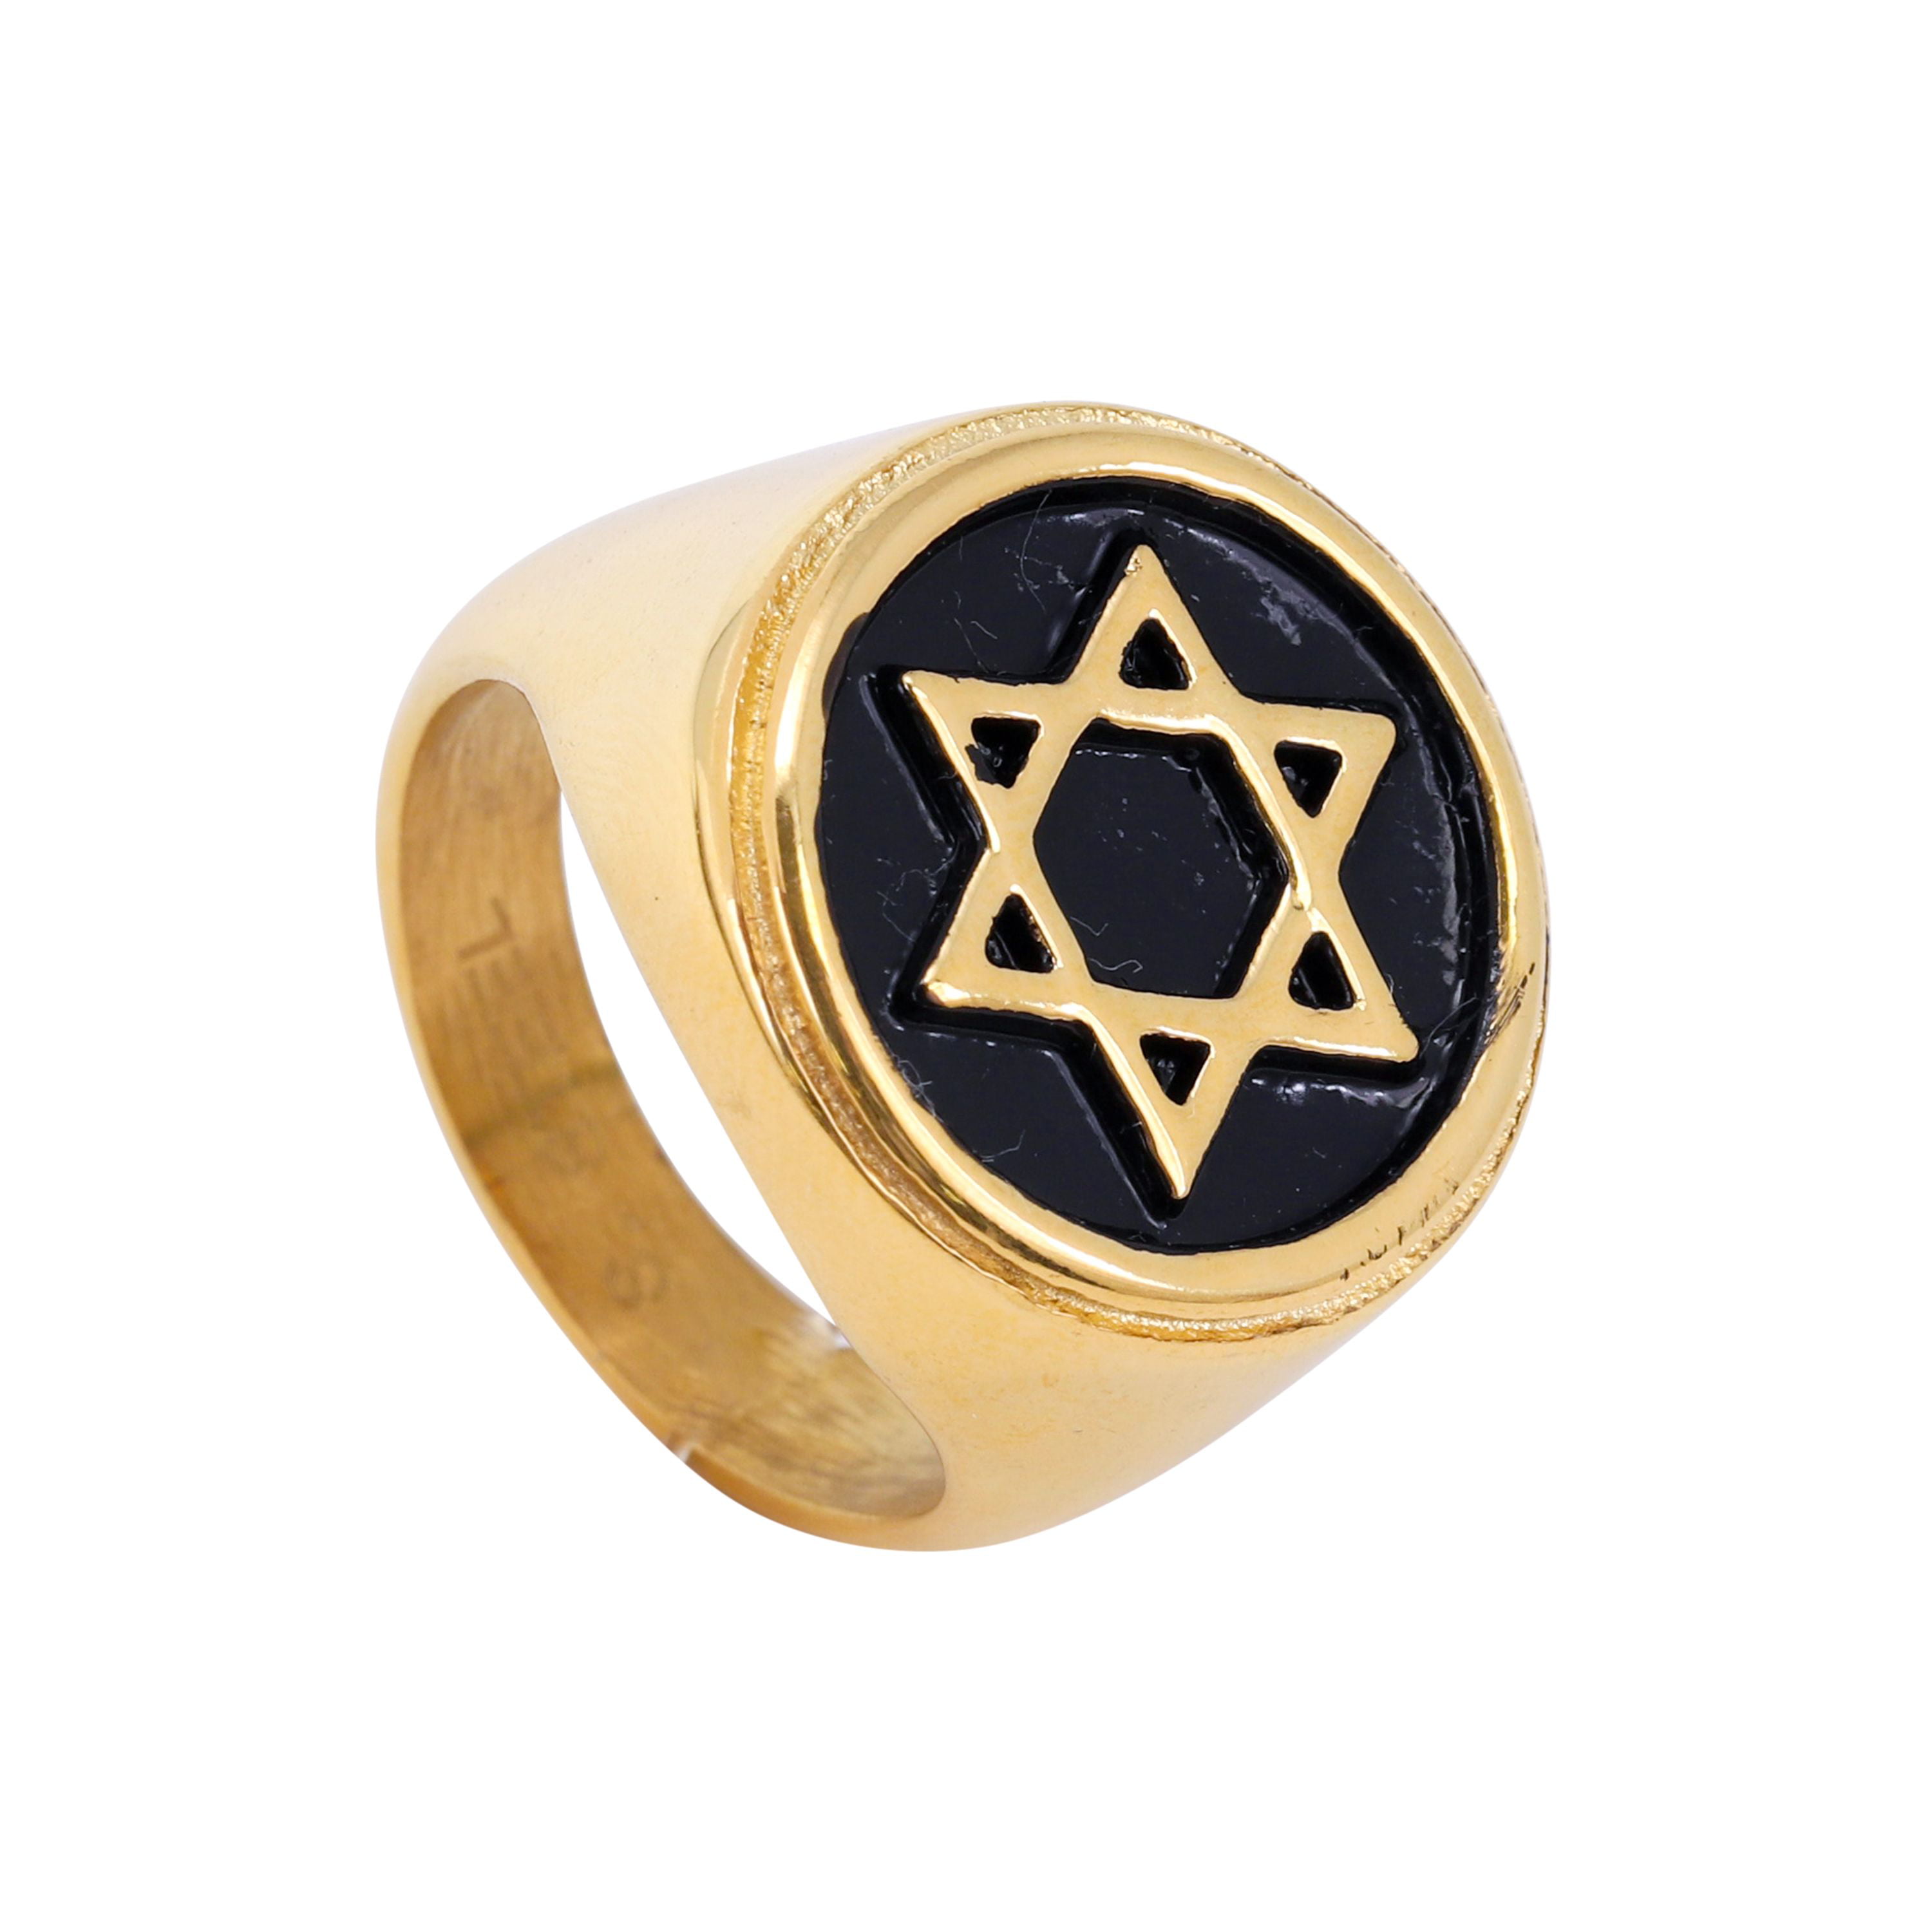 Mens Gold Tone Star Ring Stainless Steel 